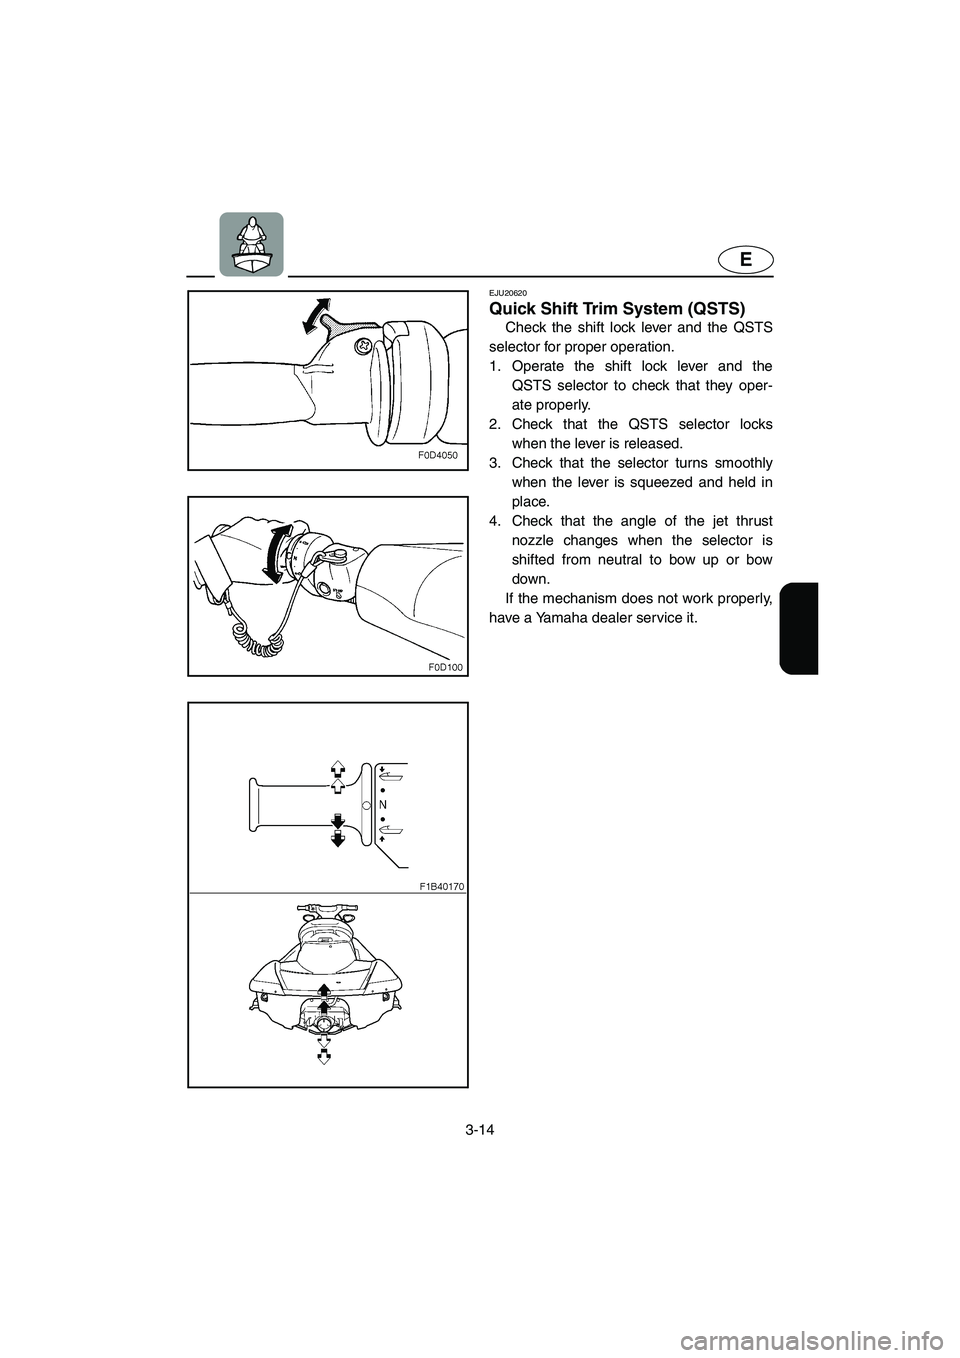 YAMAHA FX HO 2006 Manual Online 3-14
E
EJU20620 
Quick Shift Trim System (QSTS) 
Check the shift lock lever and the QSTS
selector for proper operation. 
1. Operate the shift lock lever and the
QSTS selector to check that they oper-
